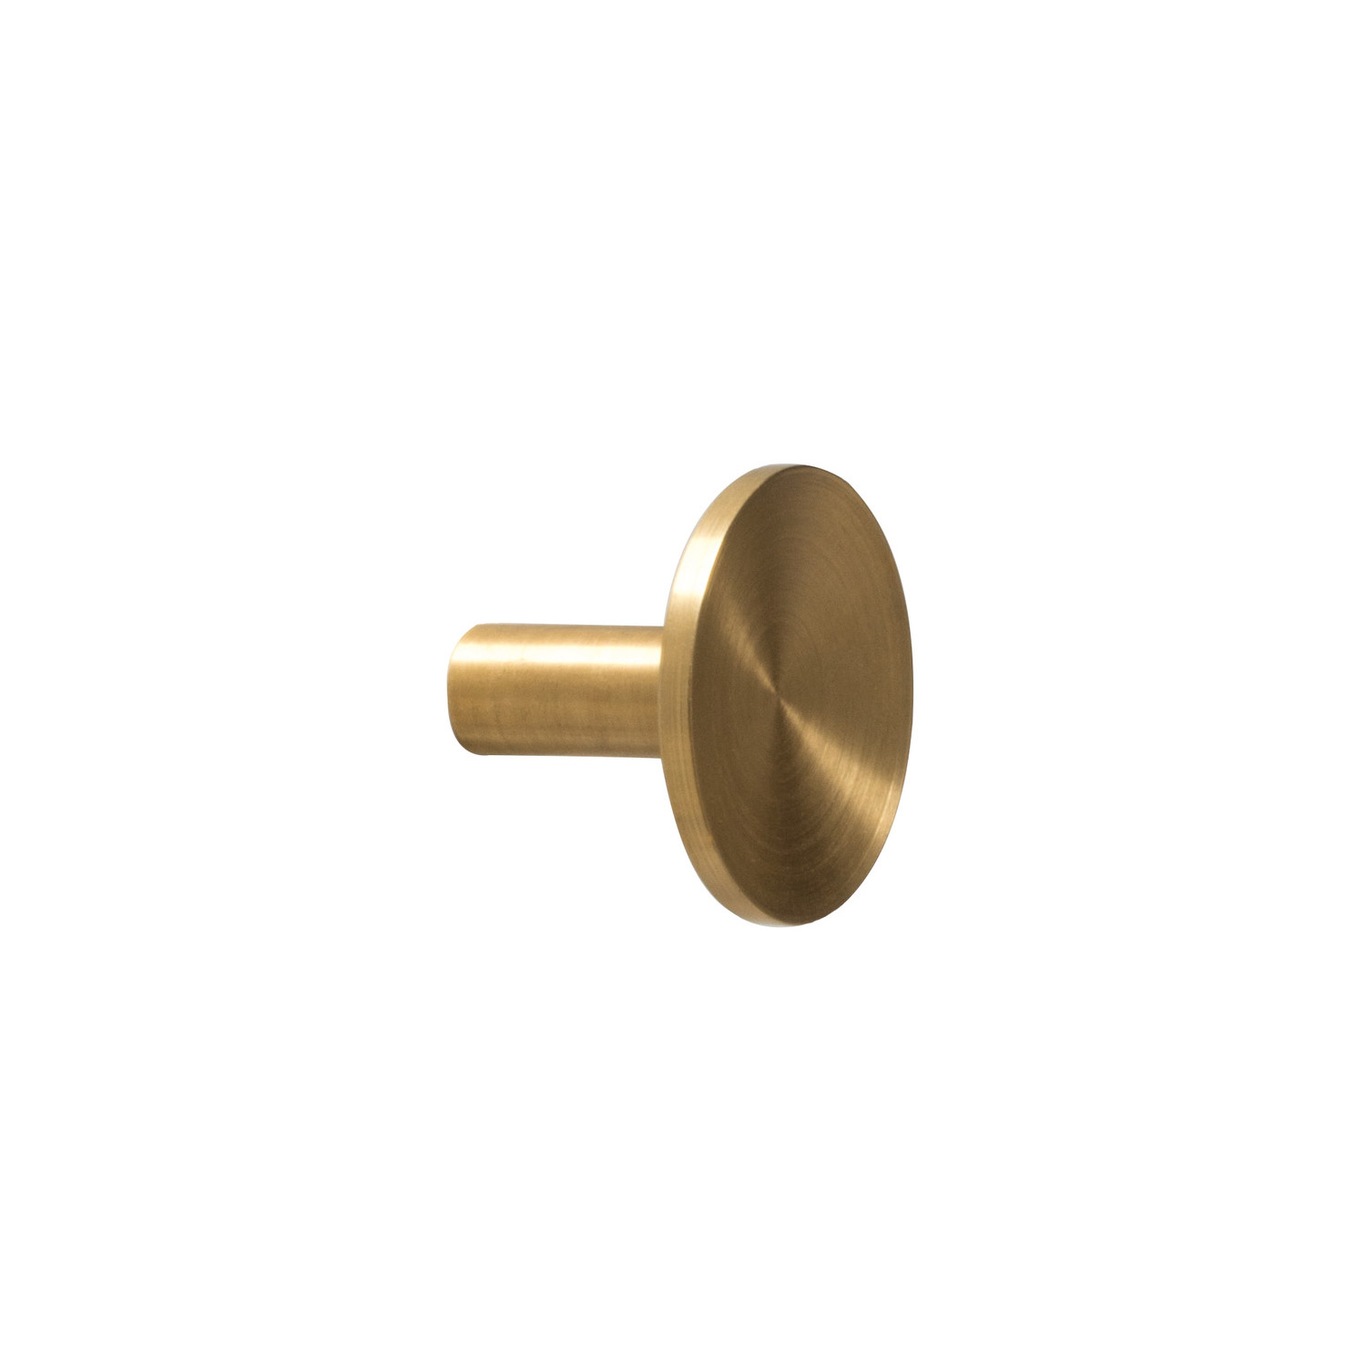 Sture 28 Hook, Brushed Untreated Brass